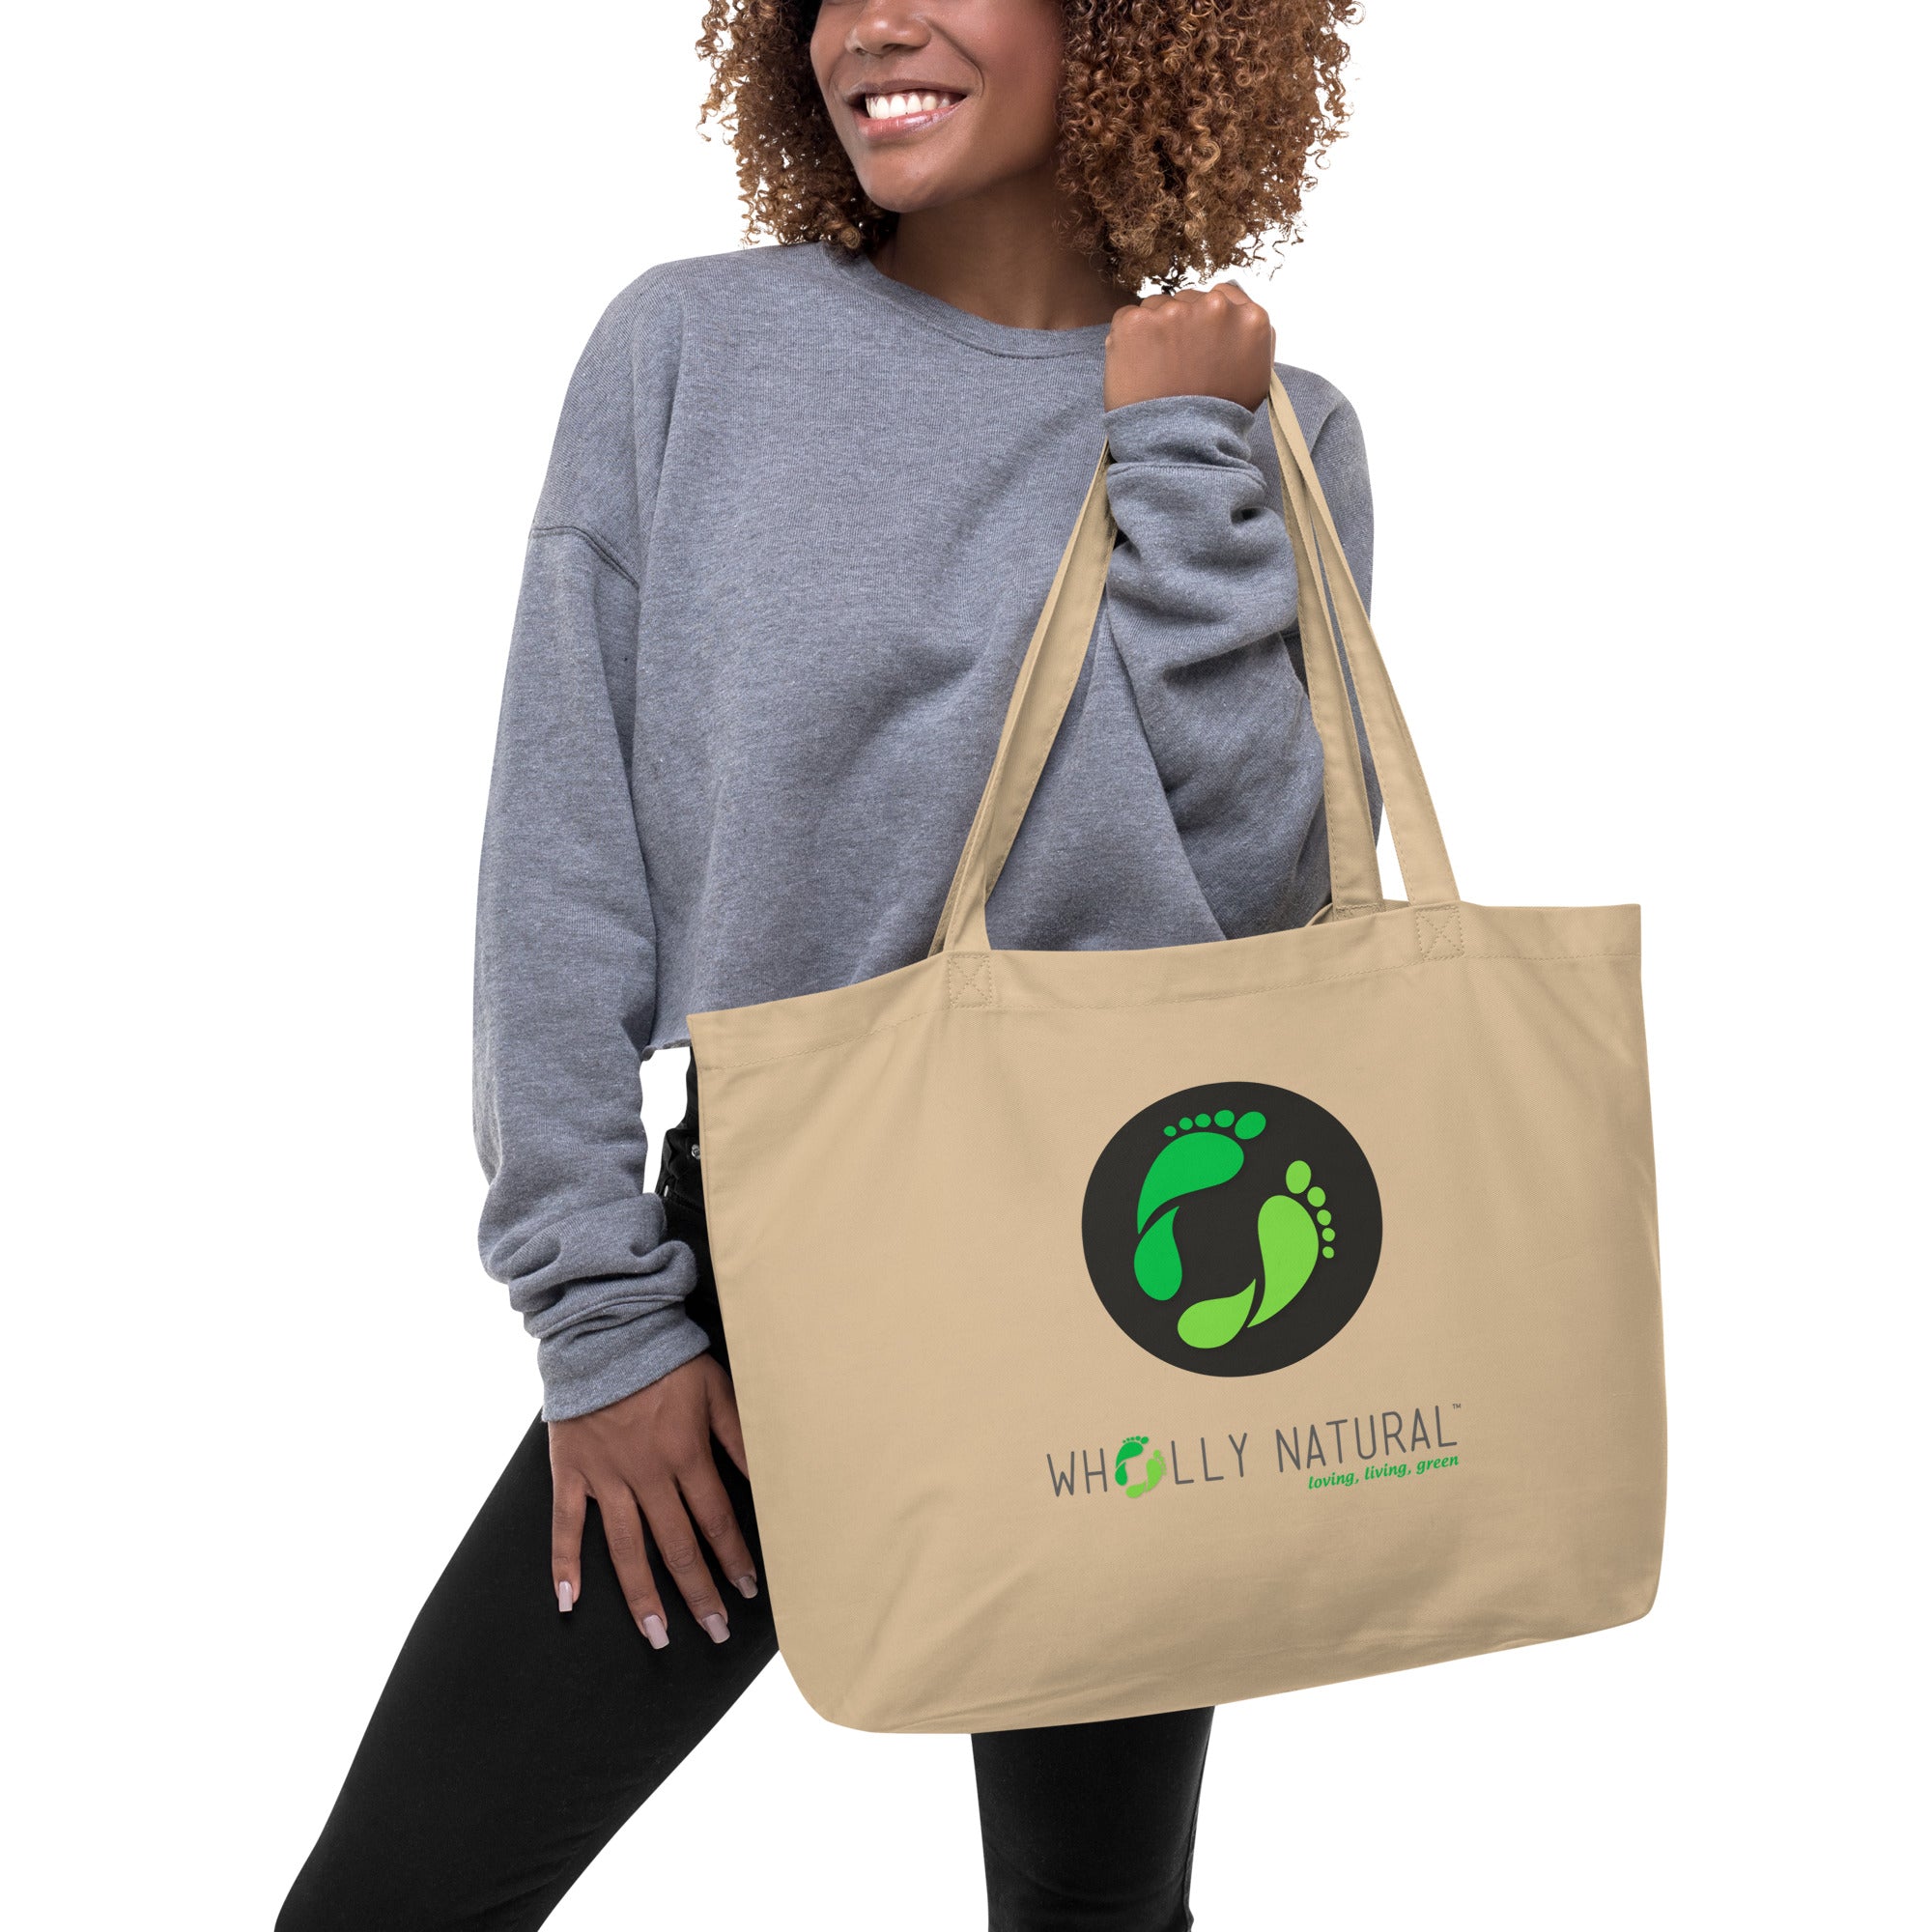 Wholly Natural™ Loving, Living, Green Large Organic Eco Tote Bag - Oyster